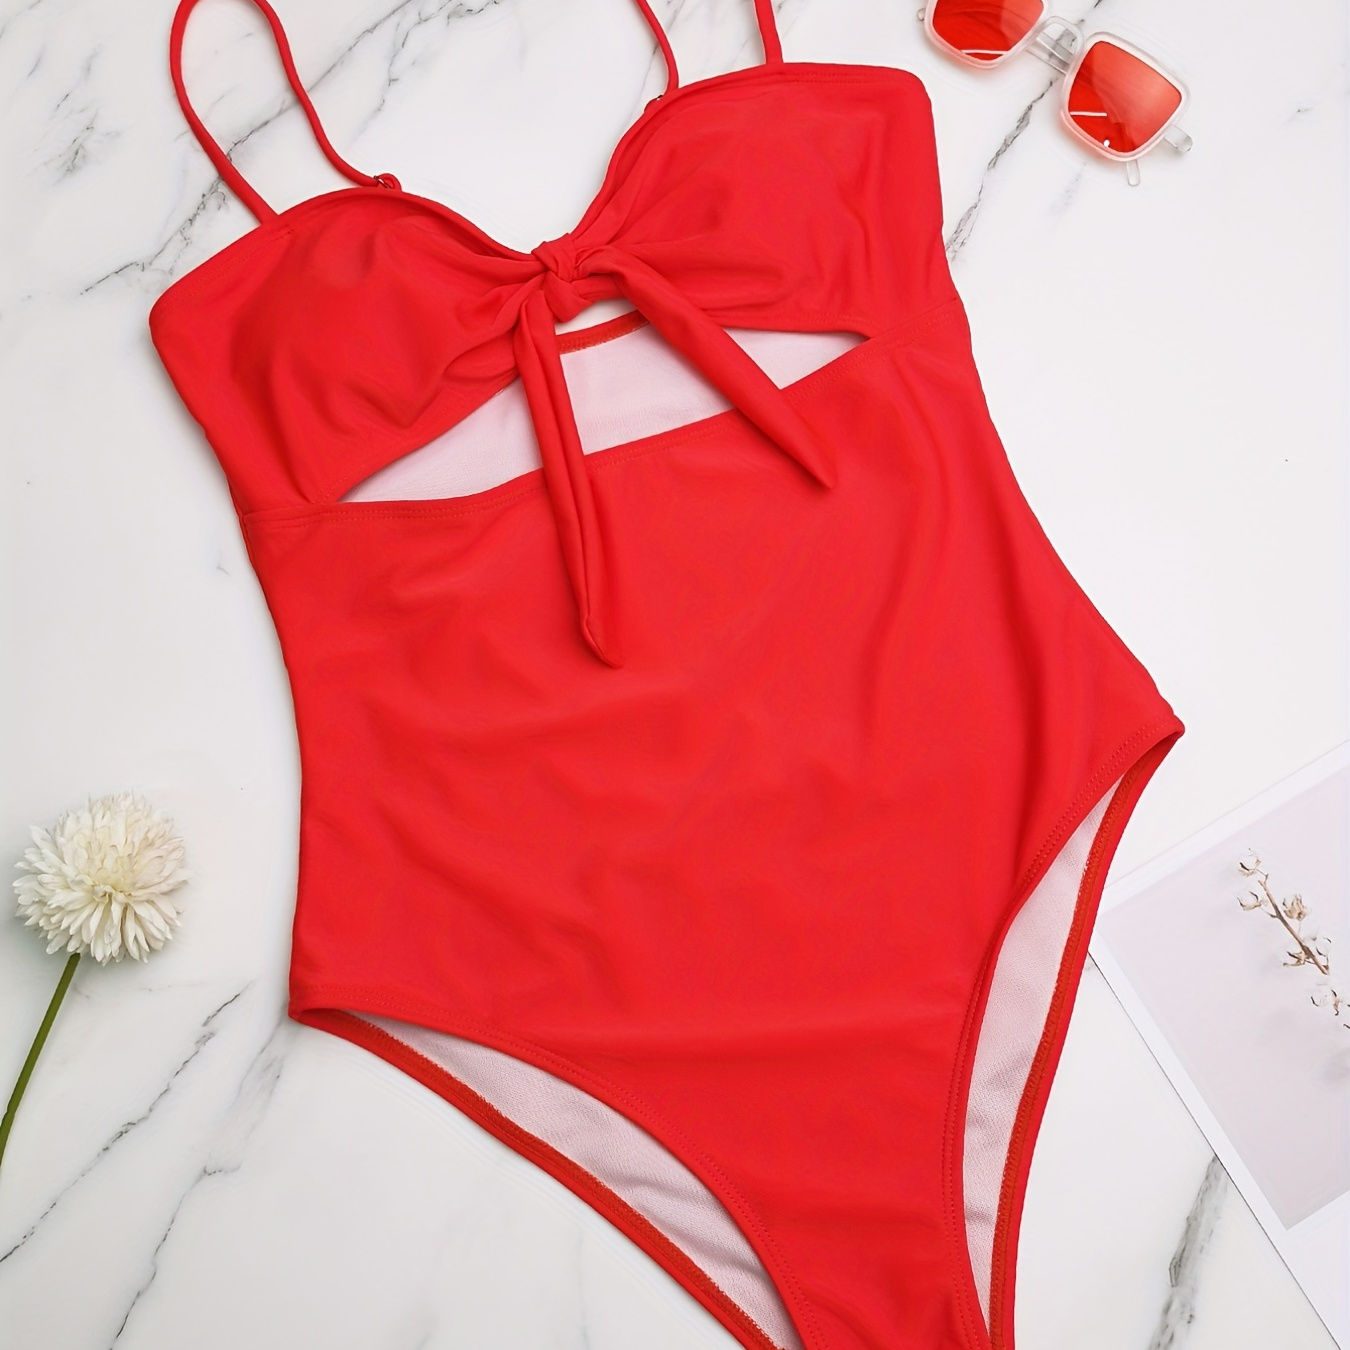 

Red V Neck Bathing Suit, Cut Out Spaghetti Straps Knot Front Tummy Control High Cut 1 Piece Swimsuit, Women's Swimwear & Clothing